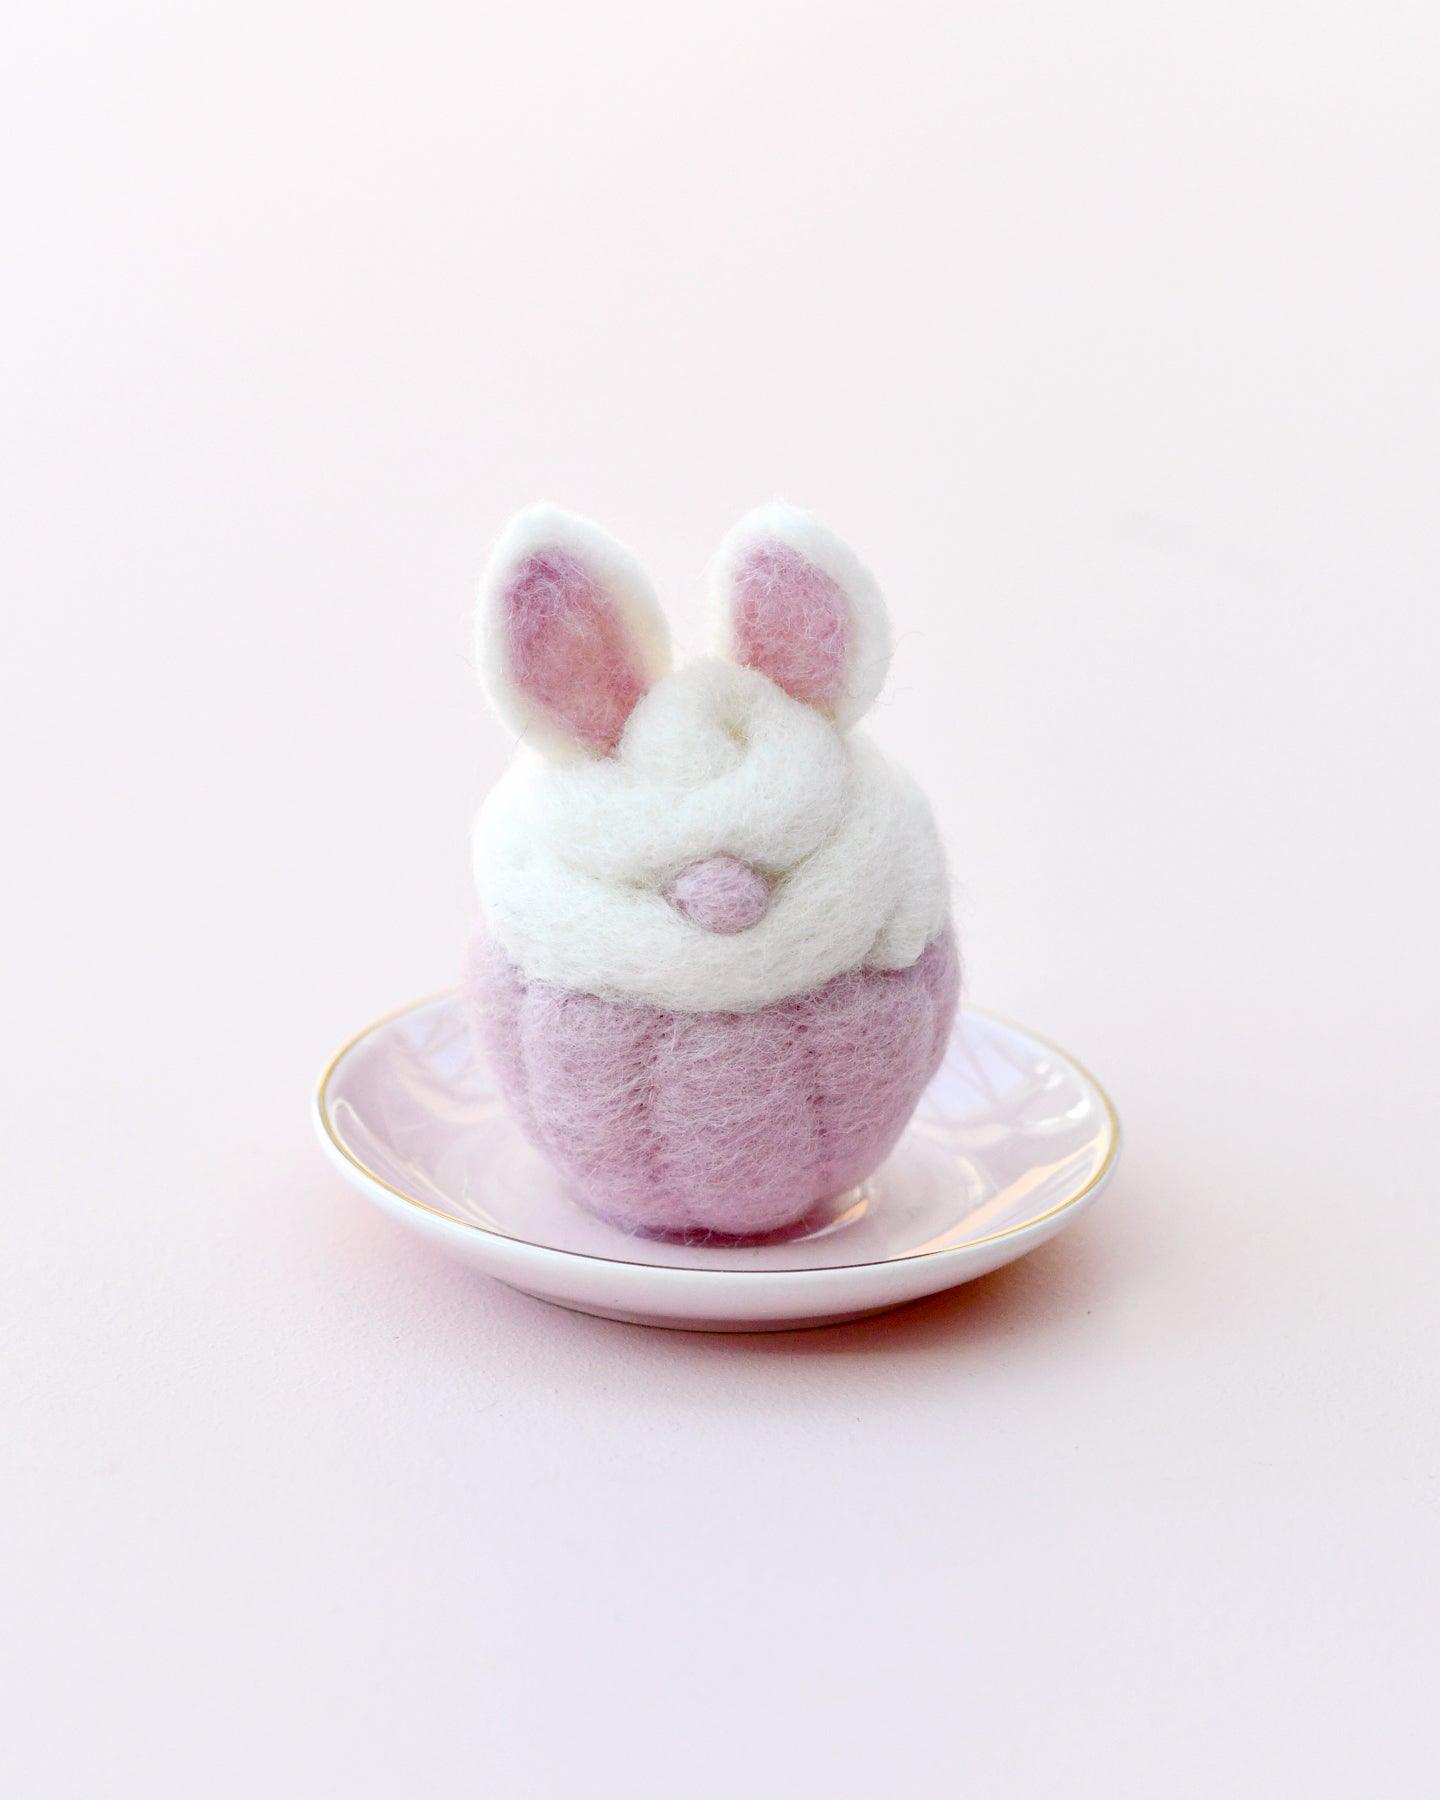 Felt Cupcake - Easter White Bunny with Ears